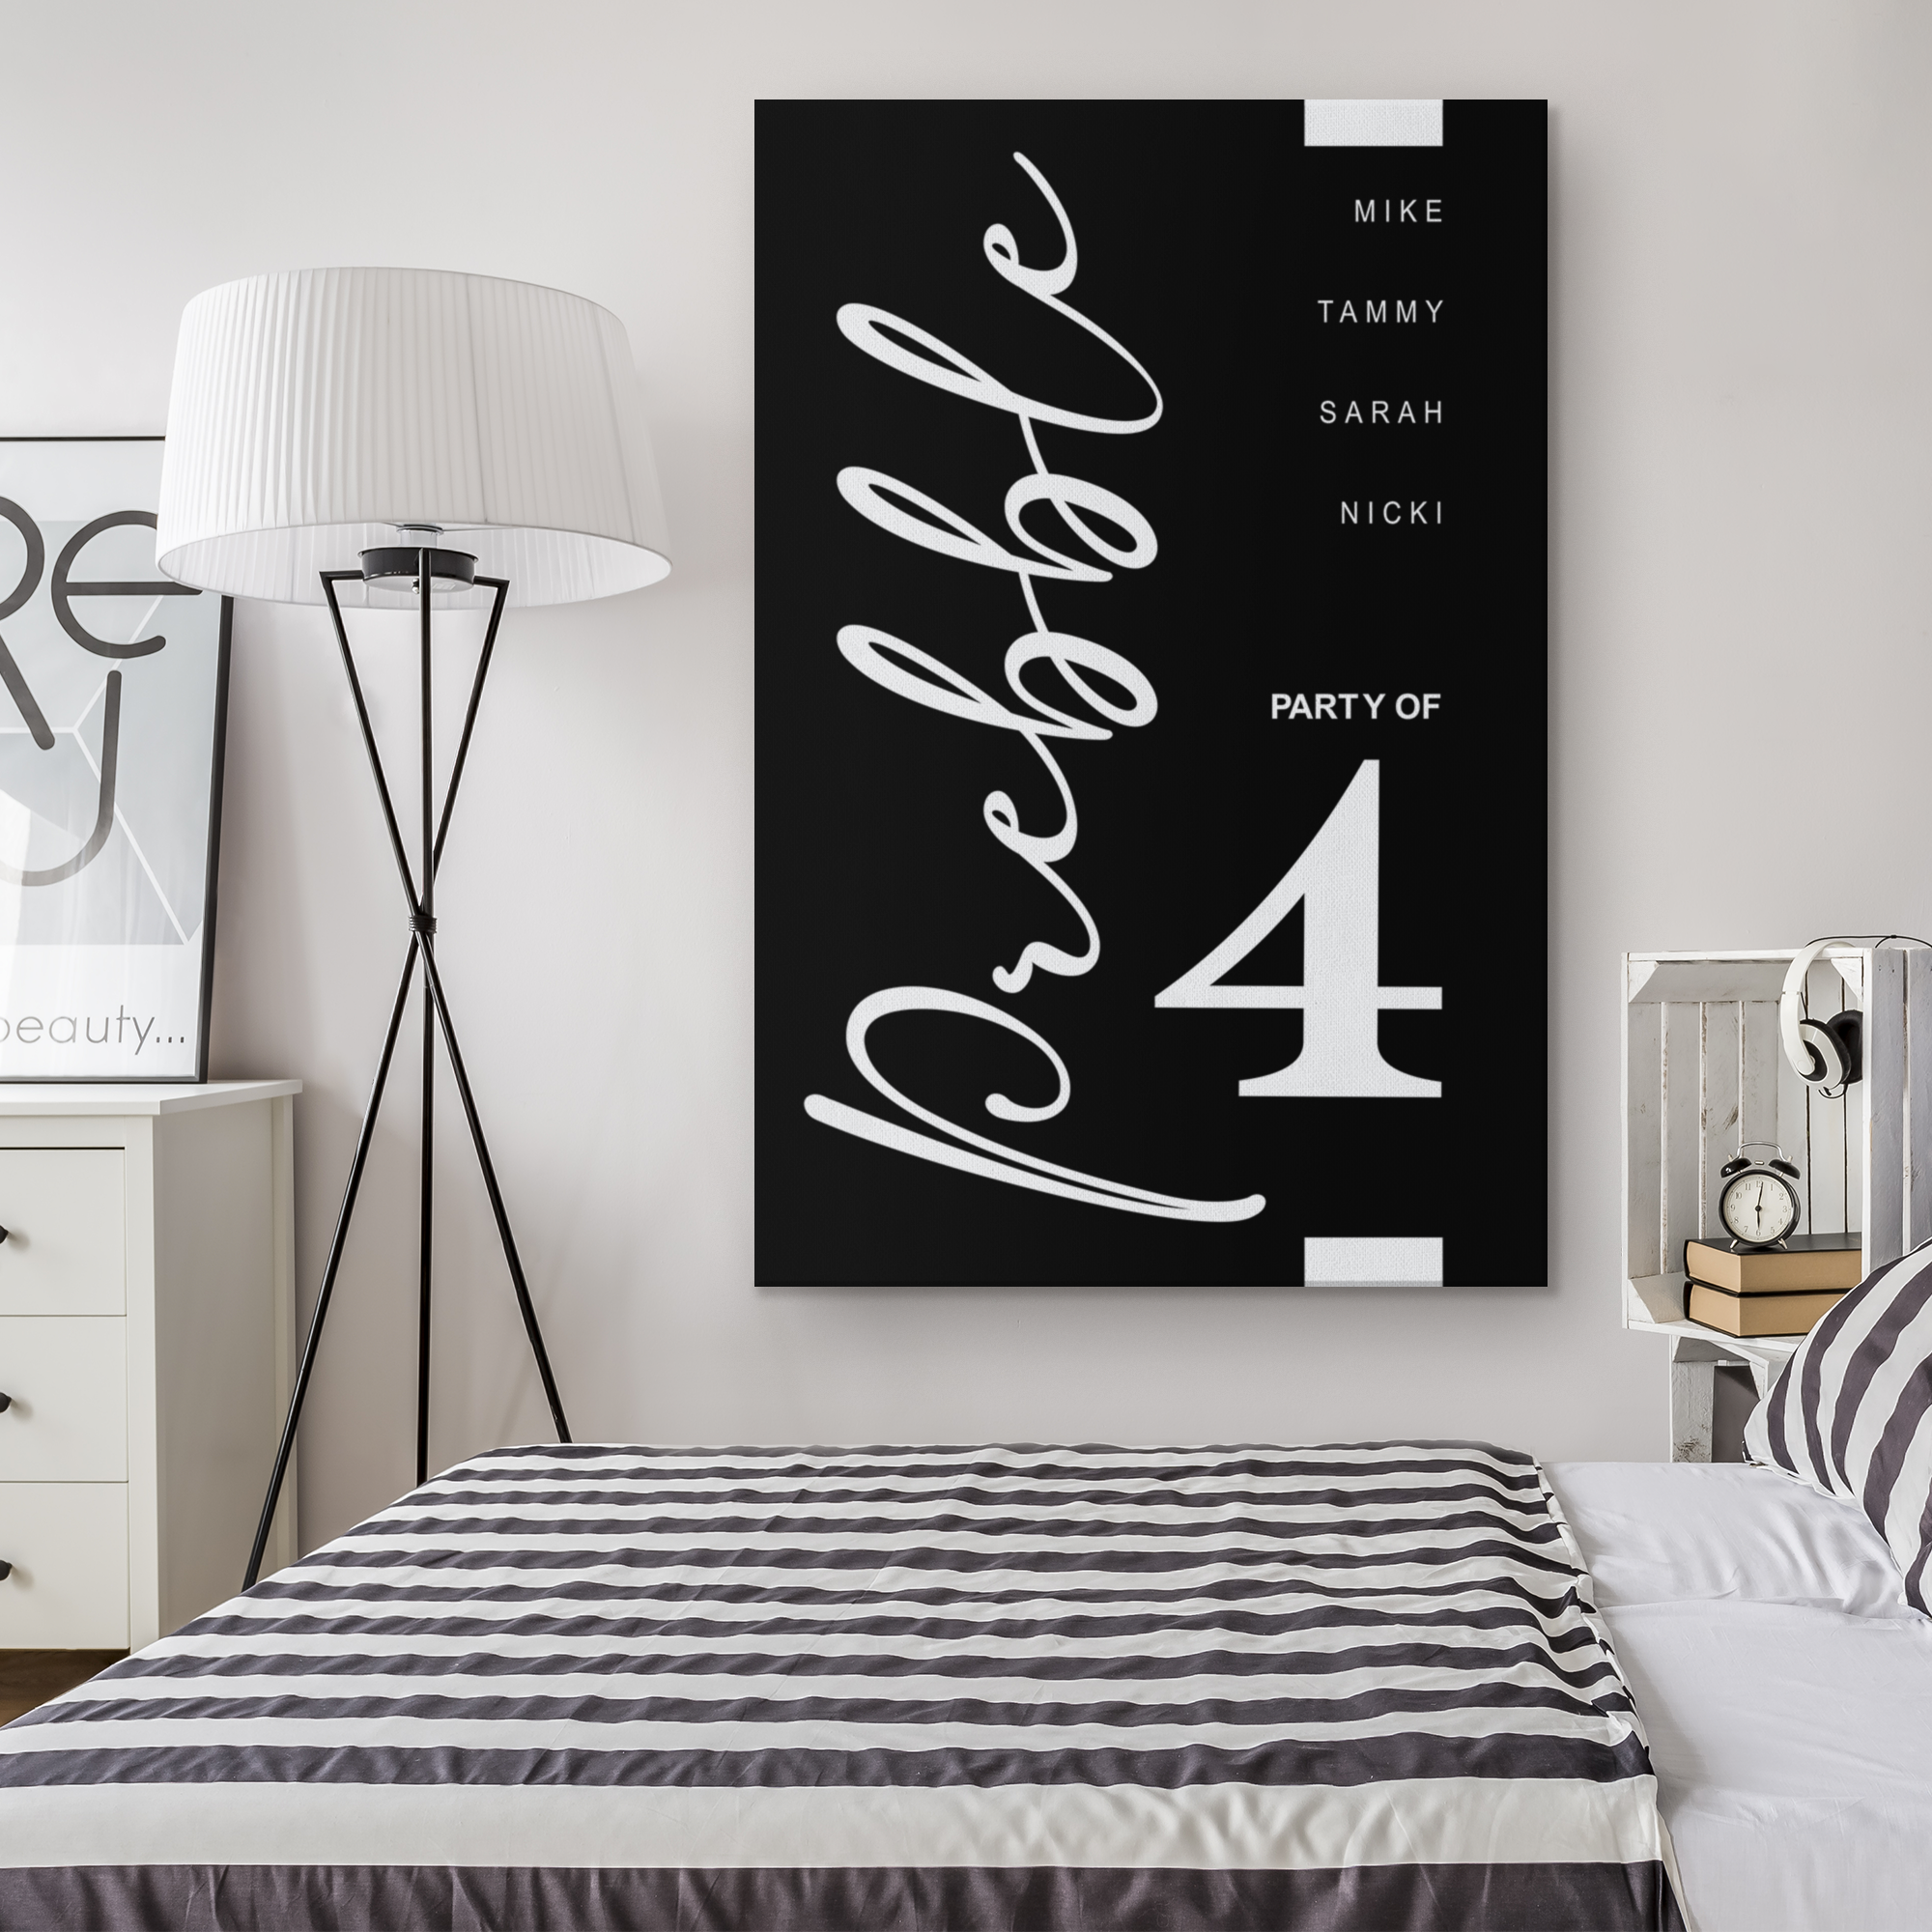 Personalized Party of 4 [your family number] black and white Family wall art canvas